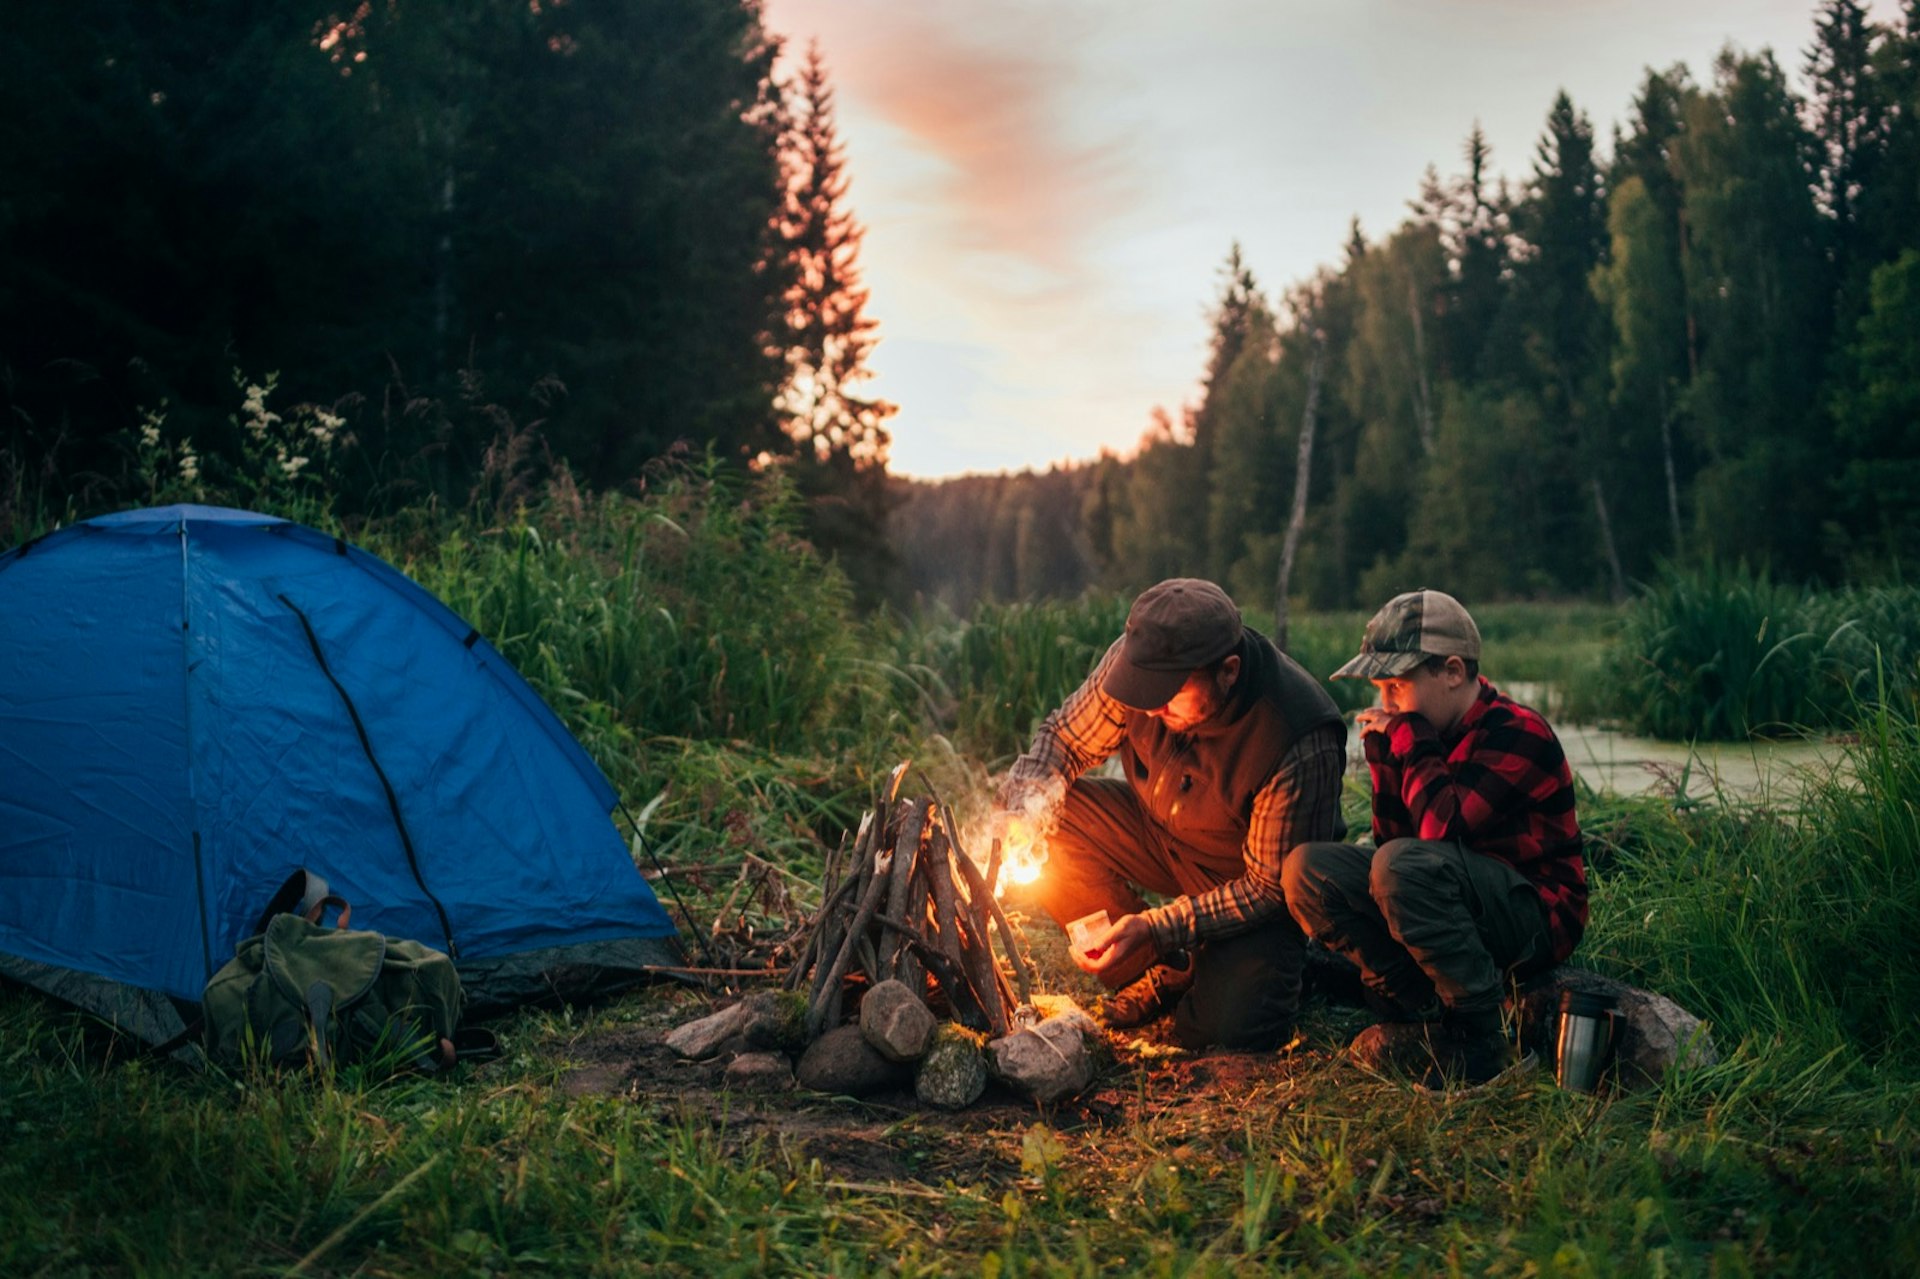 A man and son start a fire as the sun begins to set in the woods of coniferous trees. A small blue tent is near the campsite. They both wear peaked hates and checked shirts. 